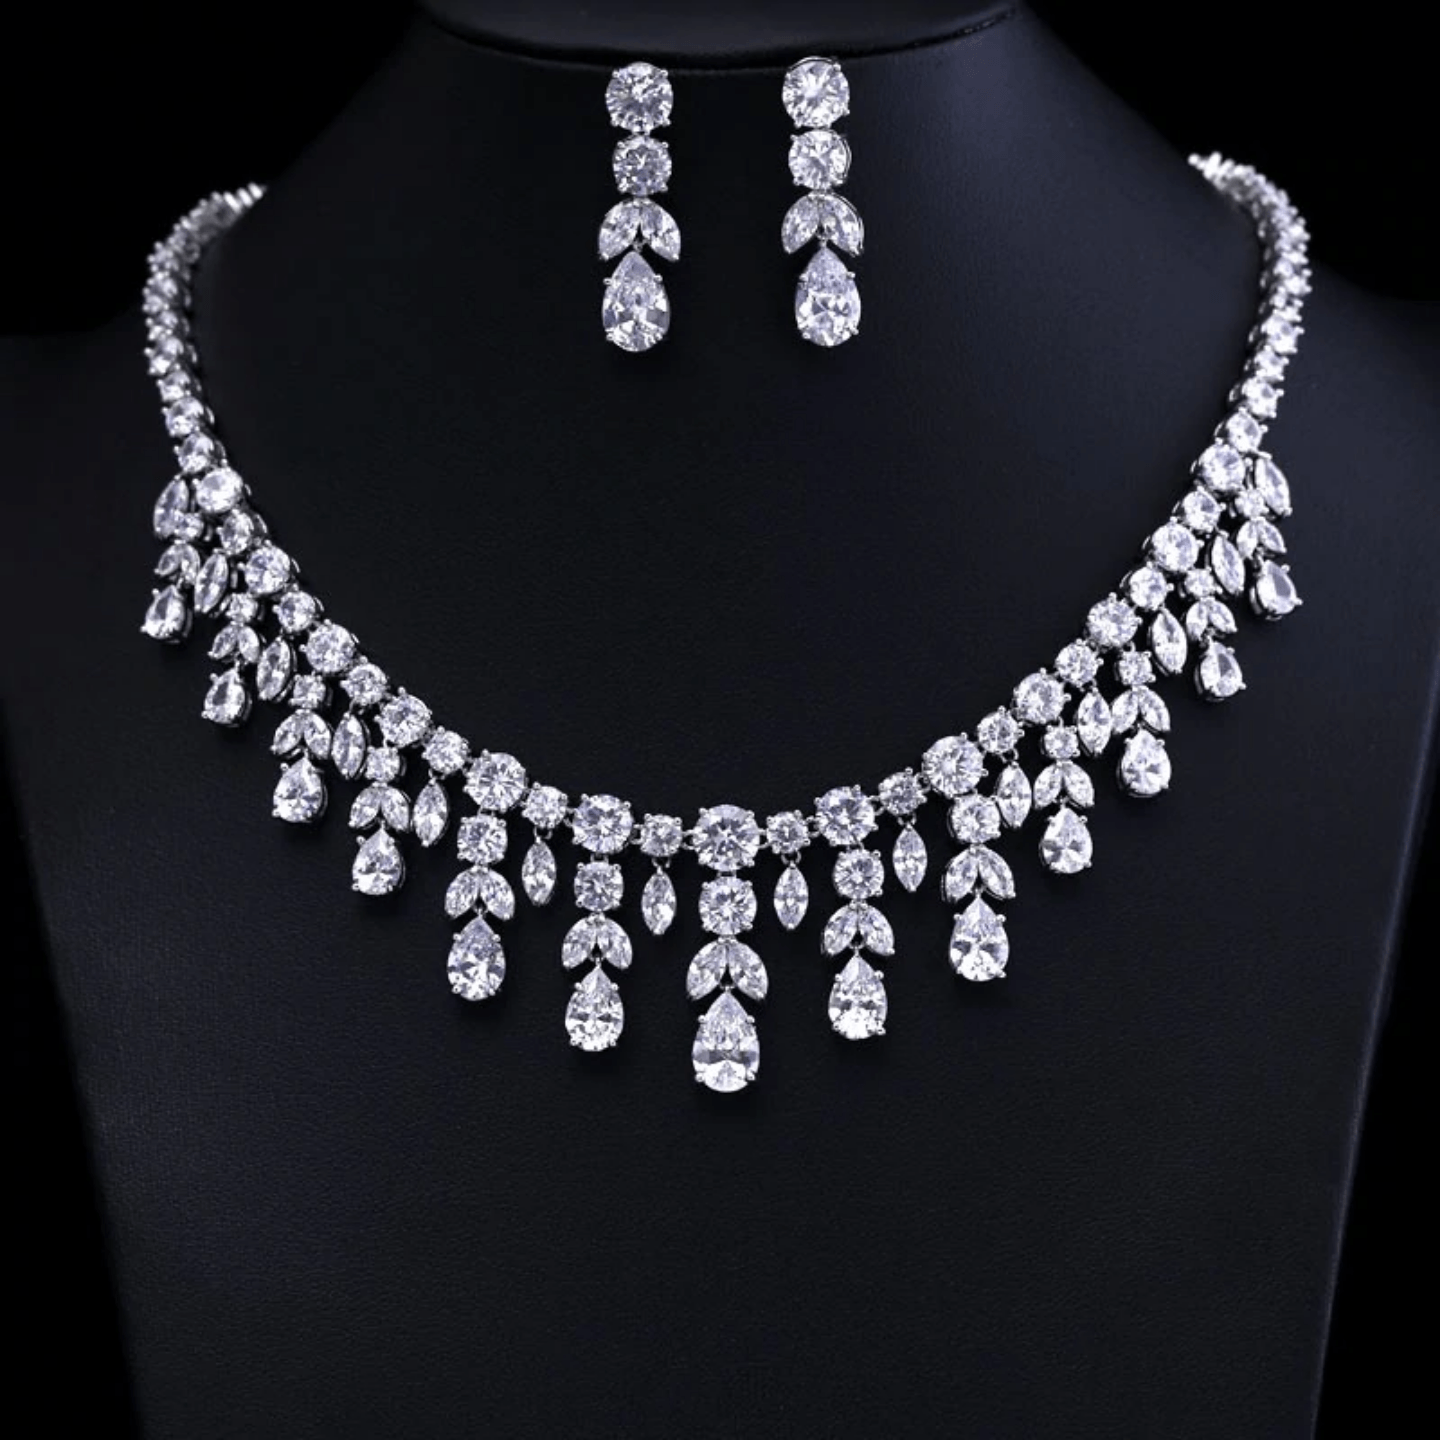 Exquisite Royal Crystal Necklace